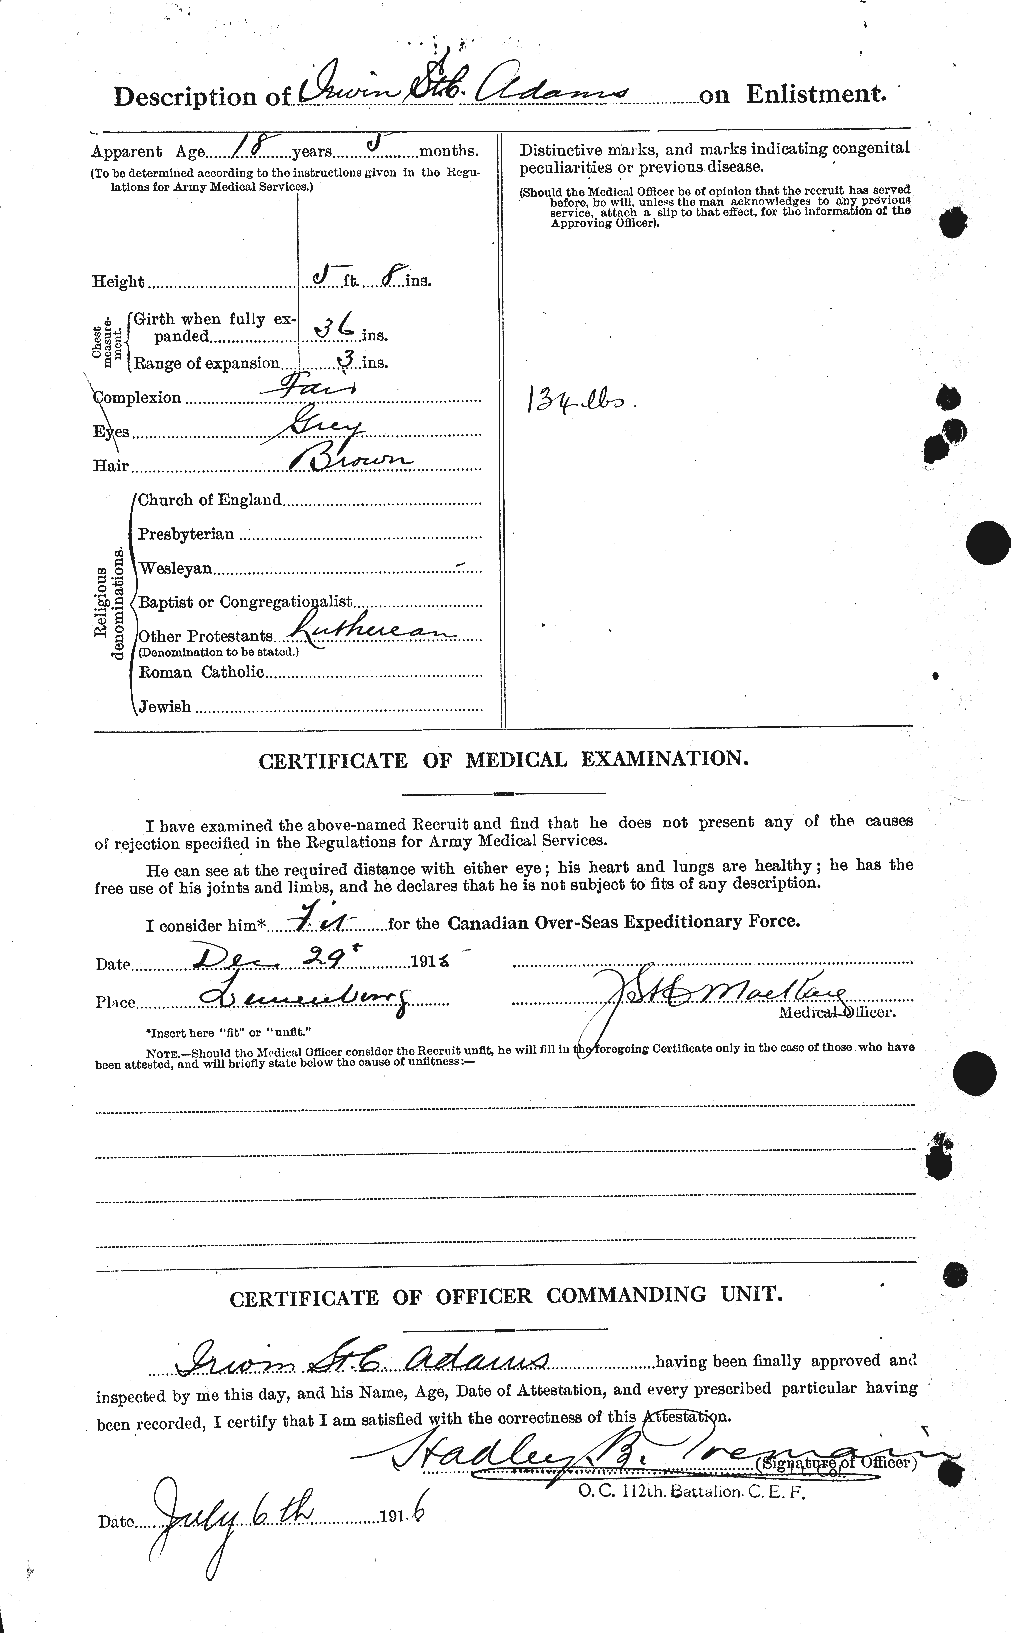 Personnel Records of the First World War - CEF 203215b